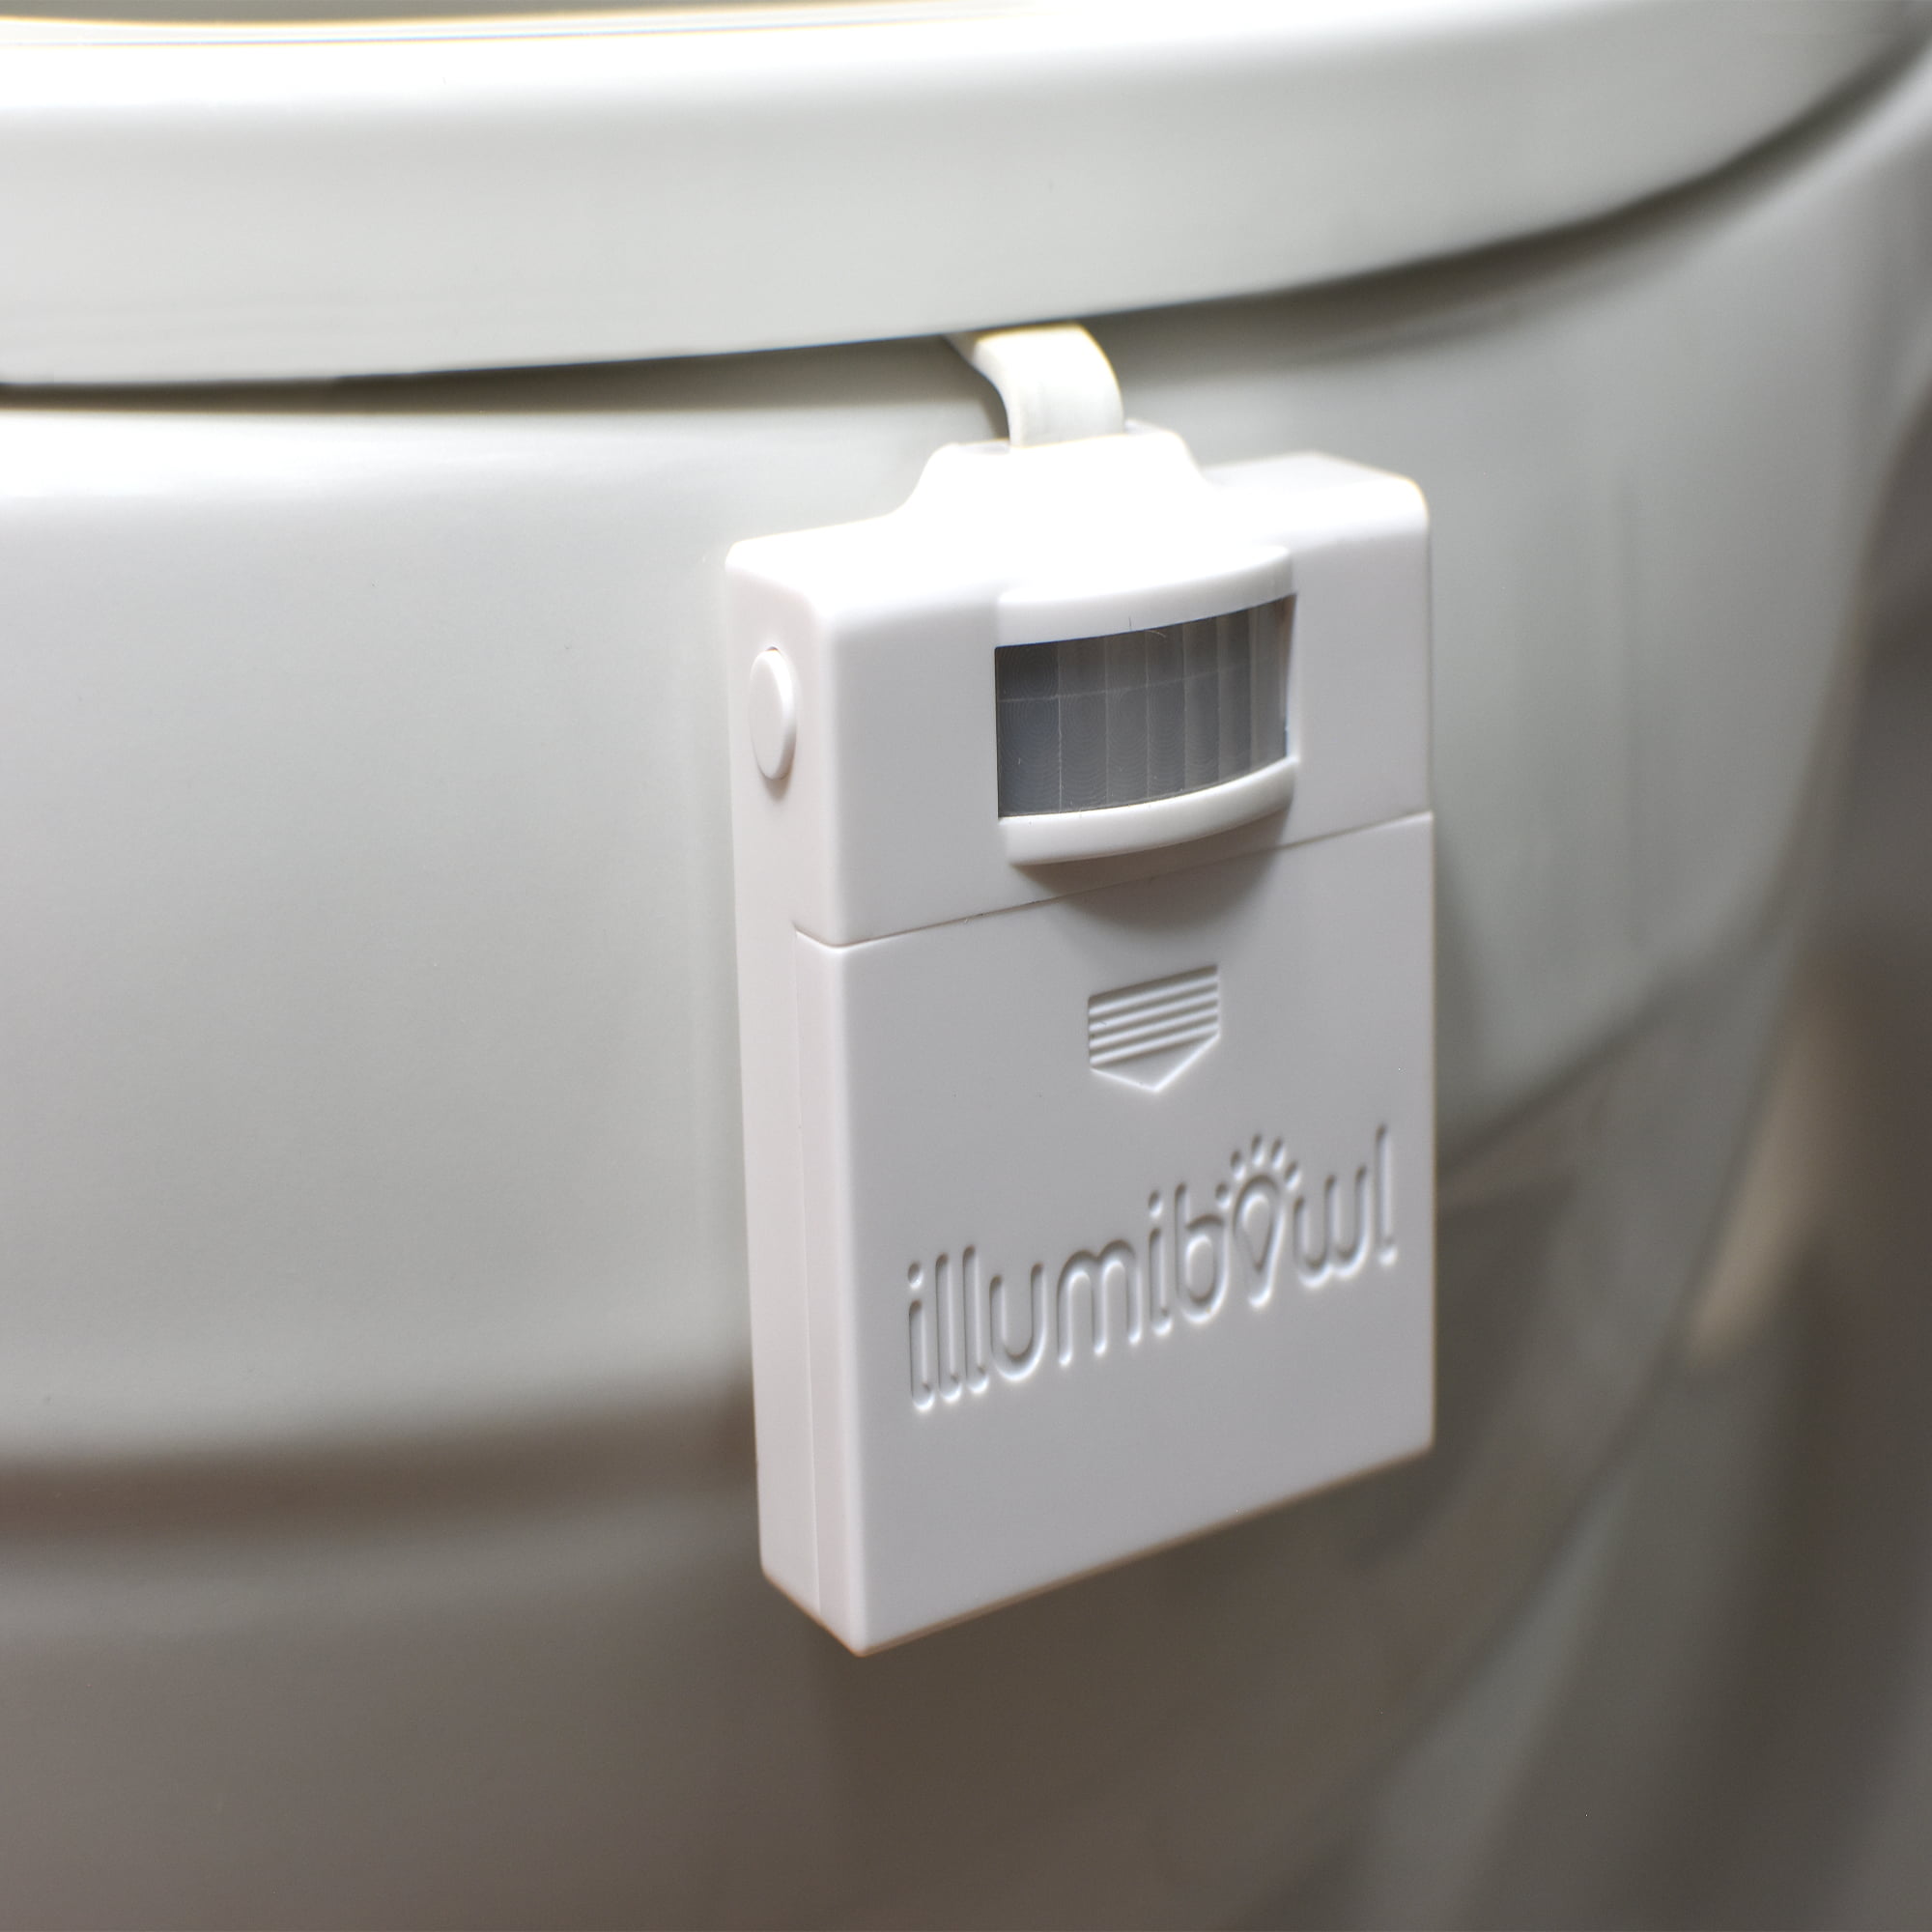 Illumibowl is your guiding toilet light for safer bathroom trips